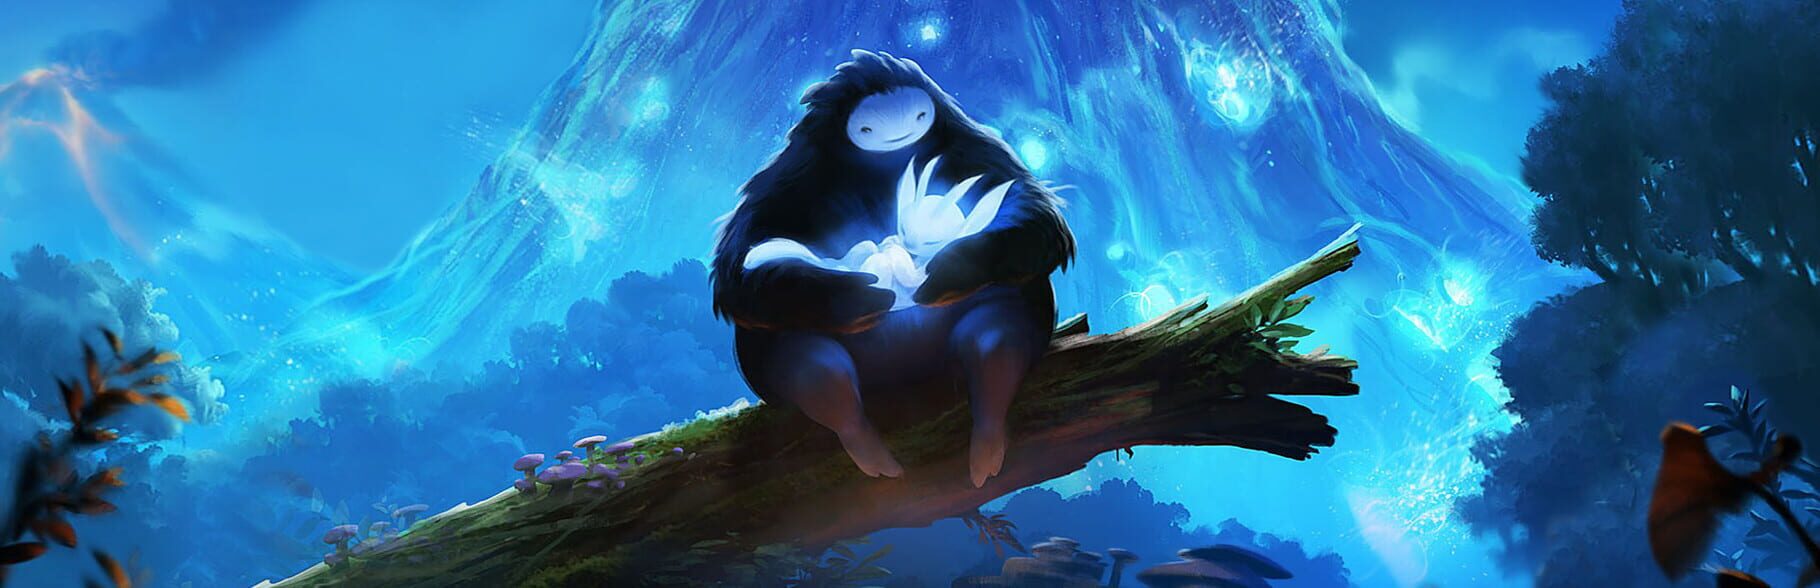 Artwork for Ori and the Blind Forest